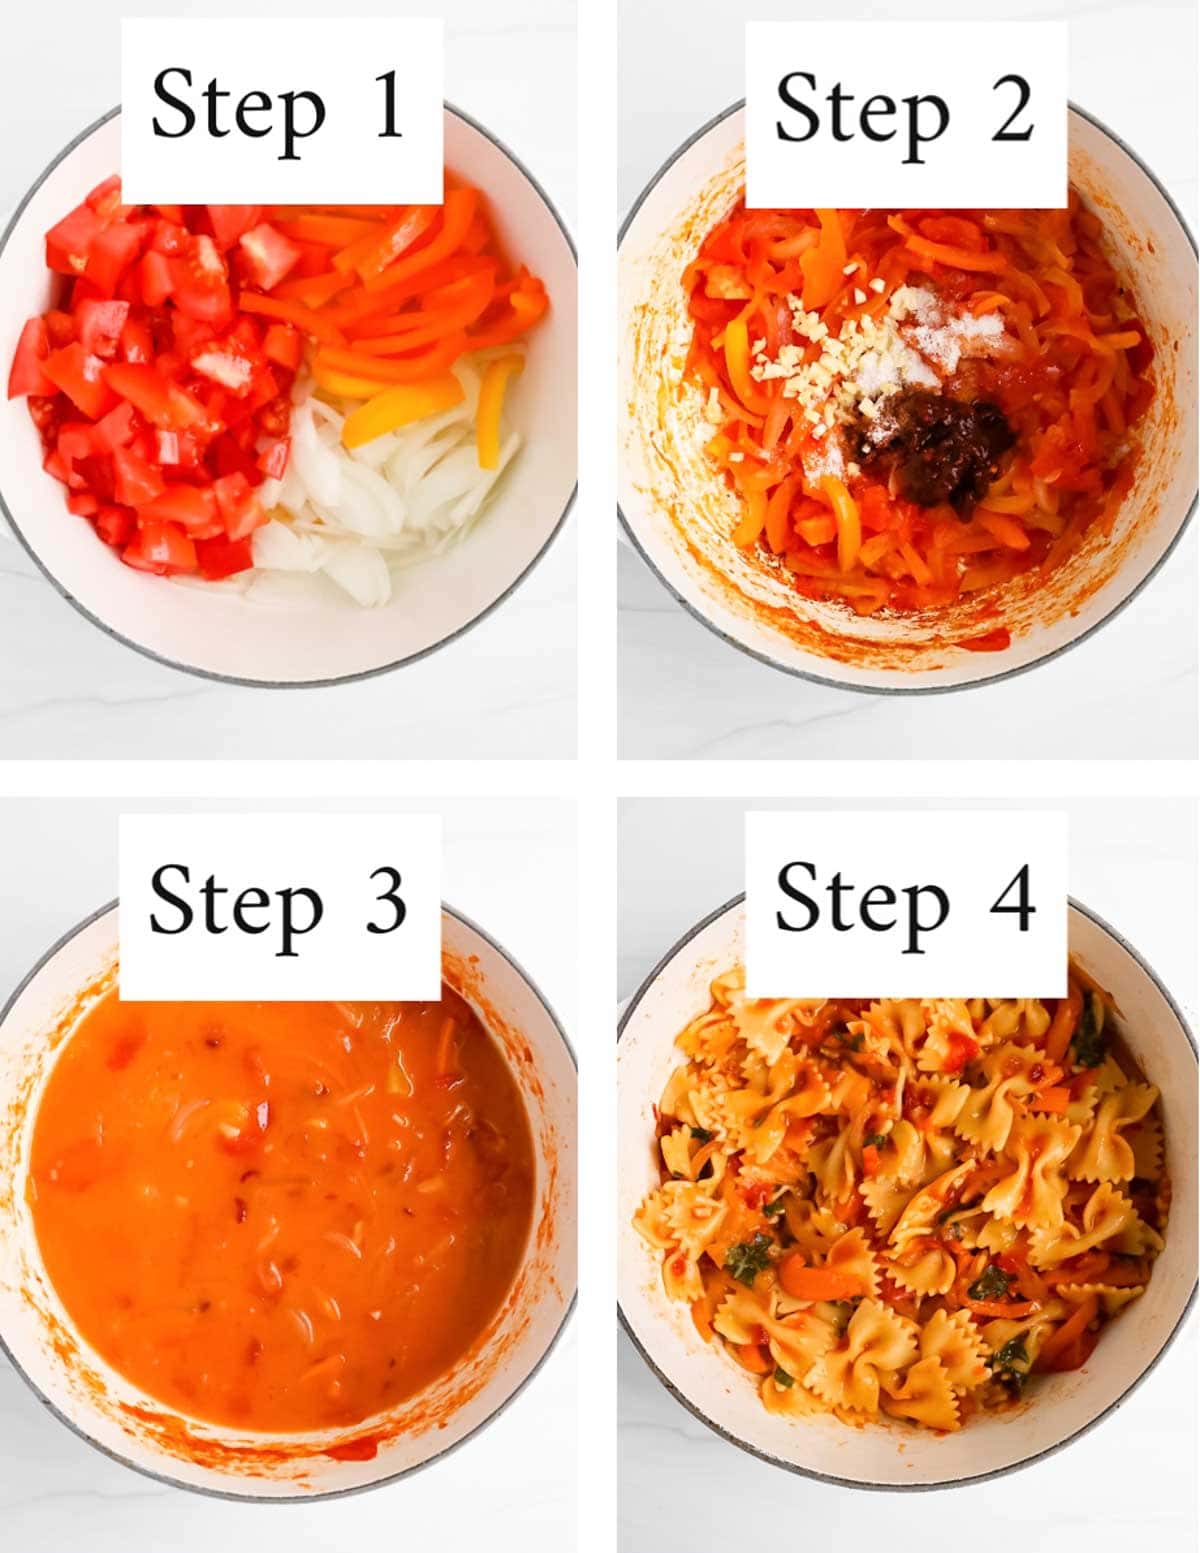 Four images labeled step 1-step 4. Step 1: a white pot filled with sliced bell peppers, onions, and tomatoes. Step 2: The peppers, onions, and tomatoes are cooked and have salt and chipotle peppers on top of them. Step 3: a white pot filled with a thick red sauce. Step 4: The sauce and vegetables are tossed in with bowtie pasta.